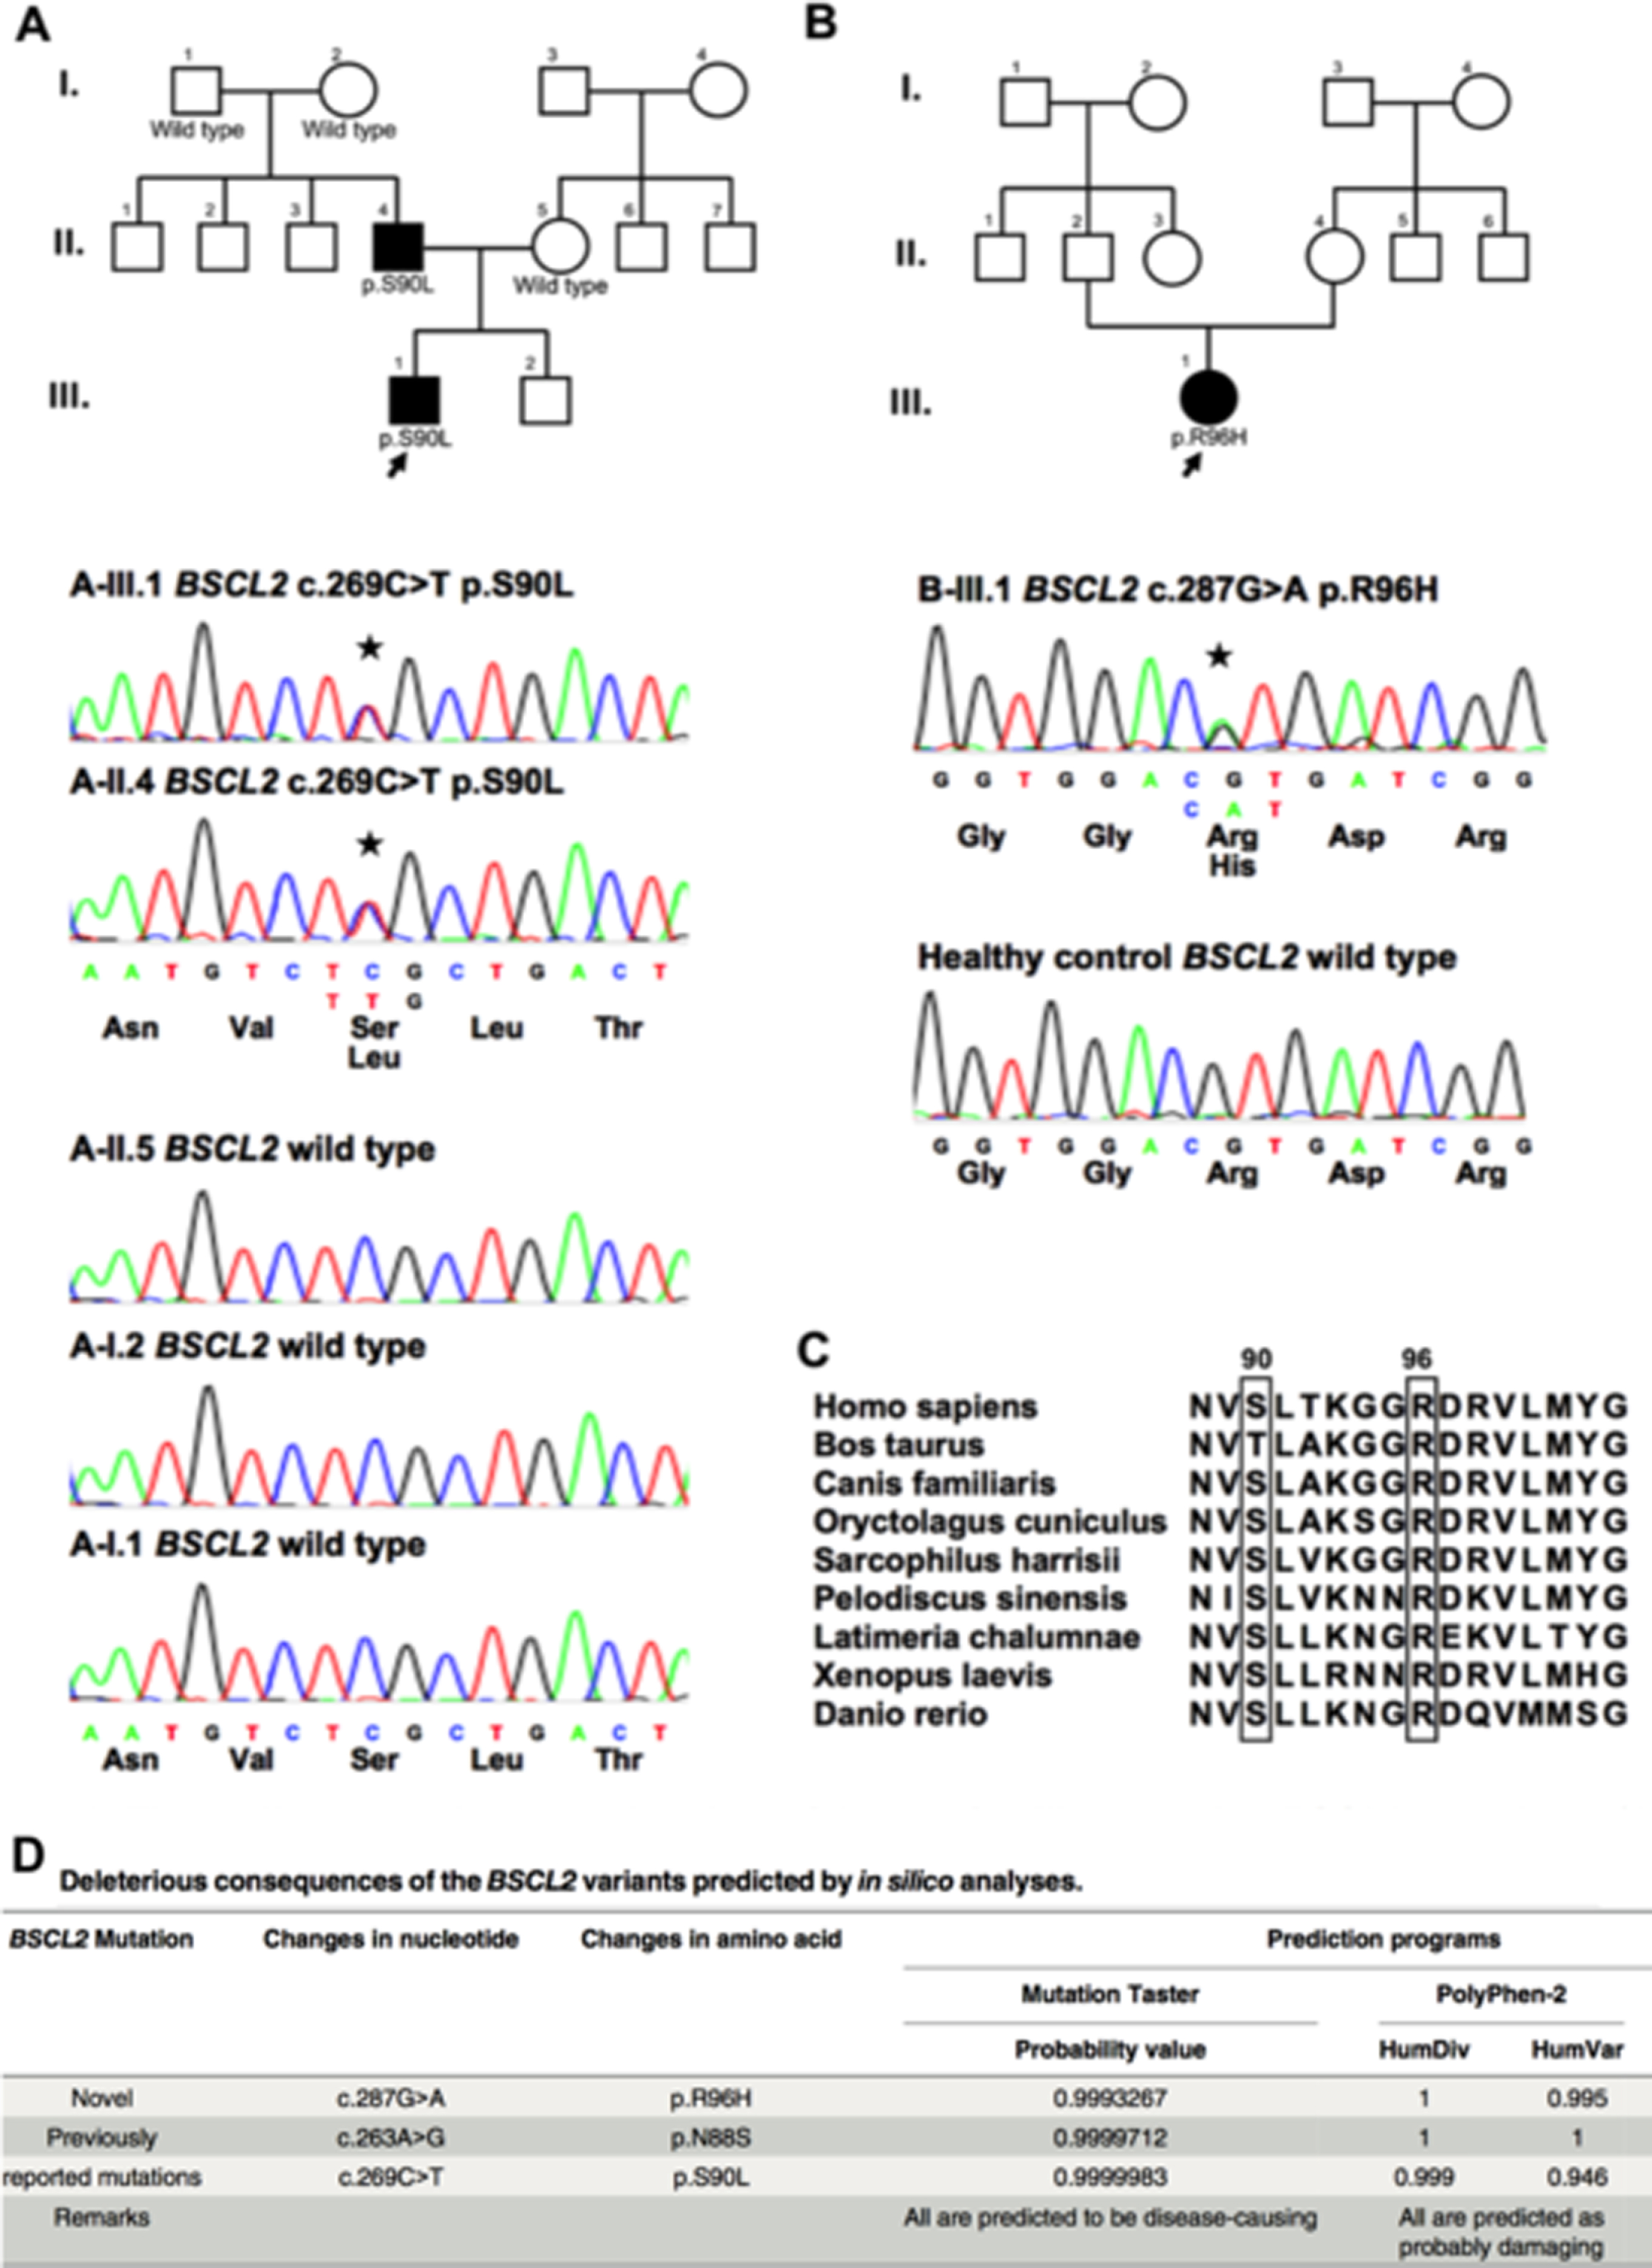 Fig. 1. The pedigrees and sequencing data of the two families carrying BSCL2 mutations, and the characteristics of the novel p. R96H mutation.